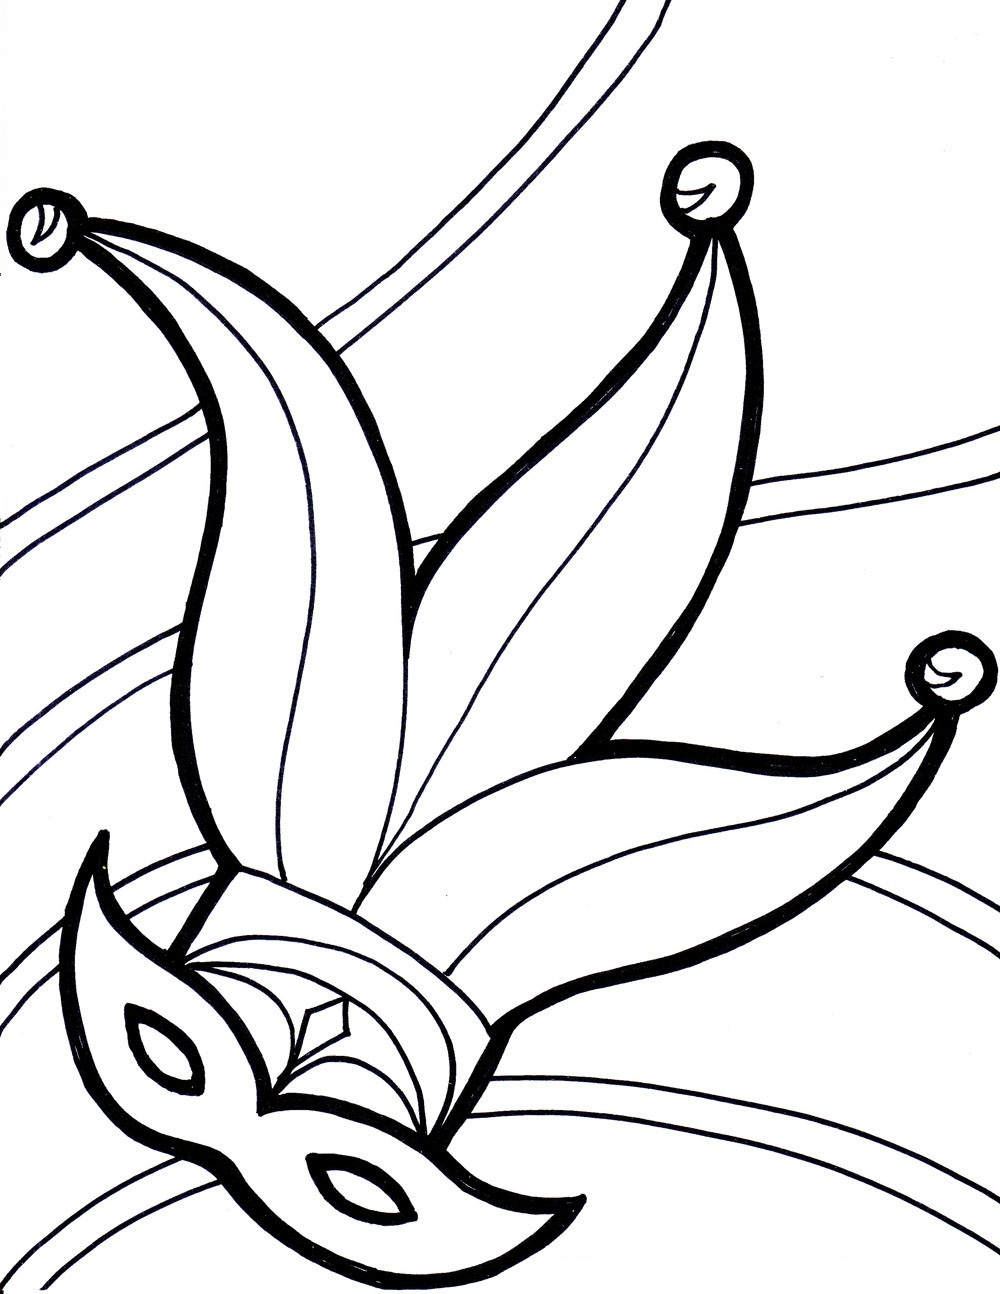 Mardi Gras Coloring Sheets For Kids
 Free Printable Mardi Gras Coloring Pages For Kids